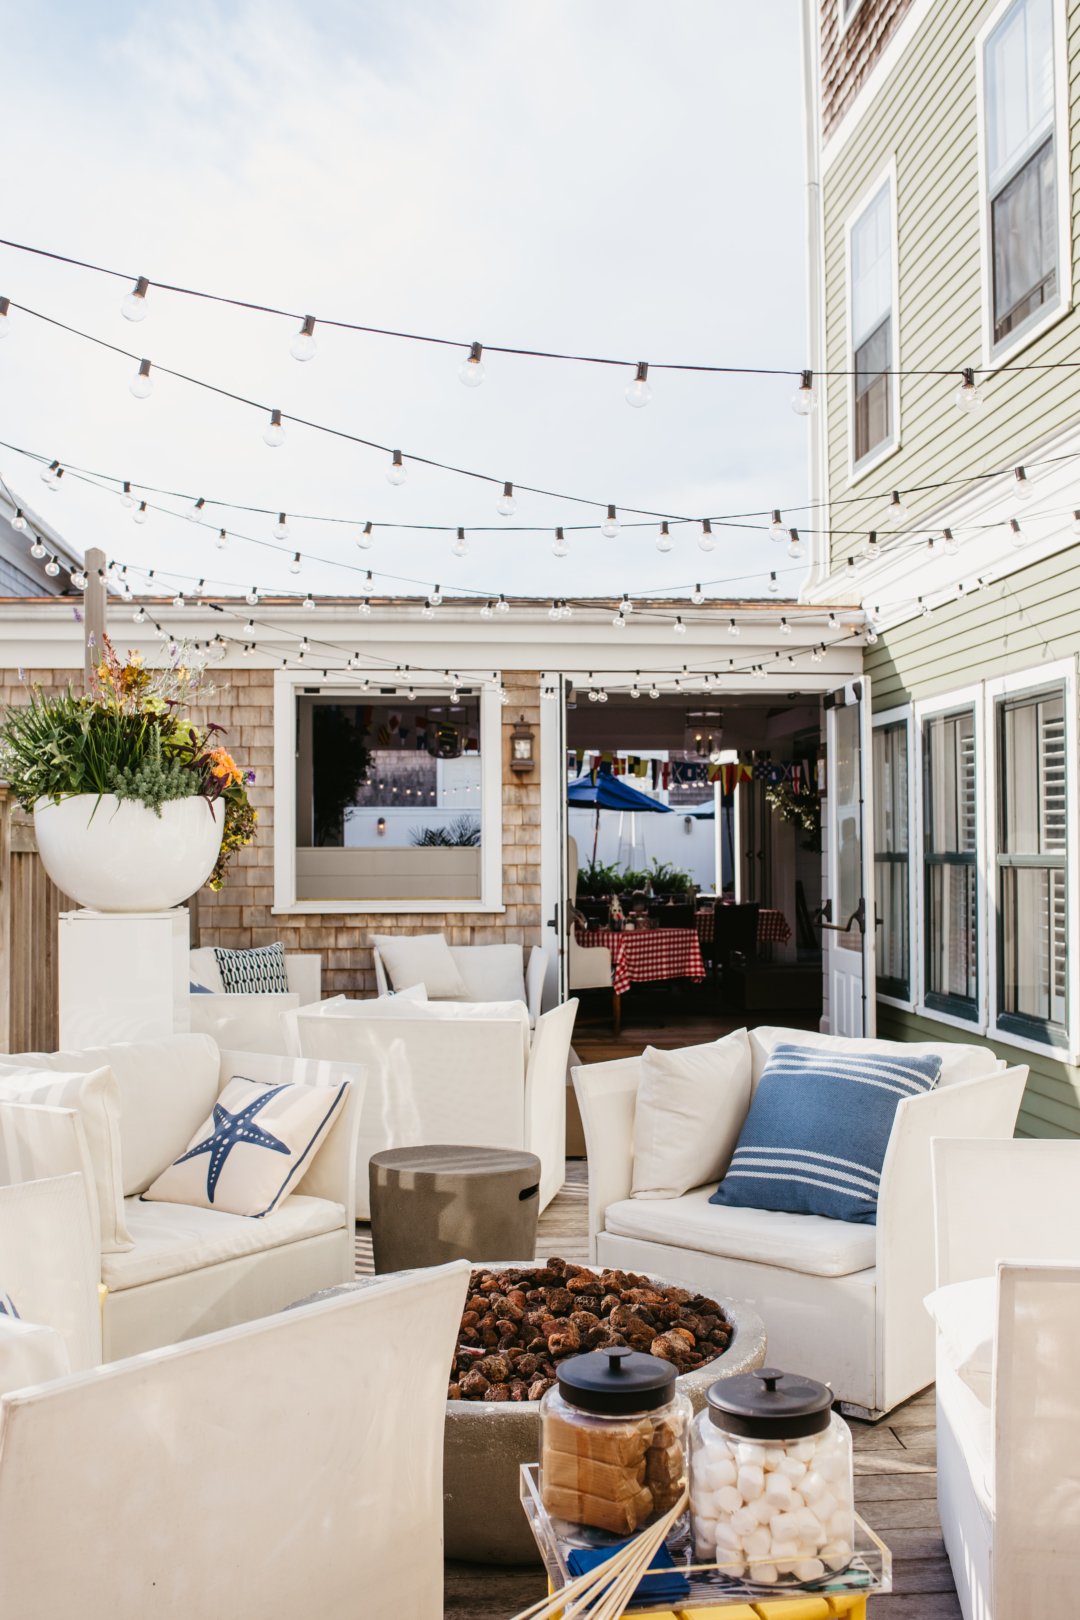 Travel: The Nantucket Hotel Clambake with Palm Beach Lately